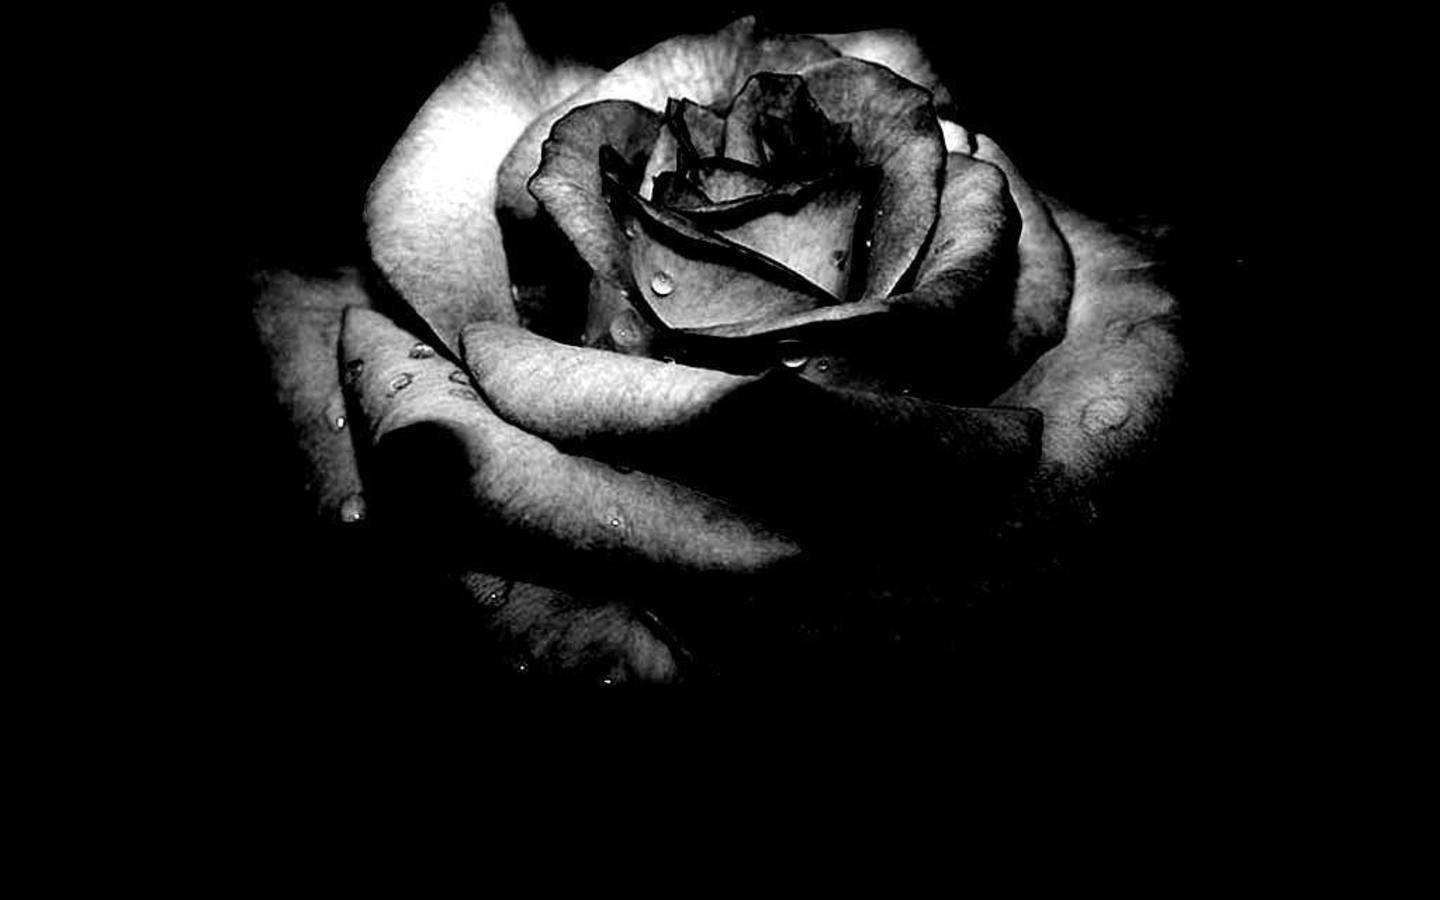 A black rose with water droplets on it. - Black rose